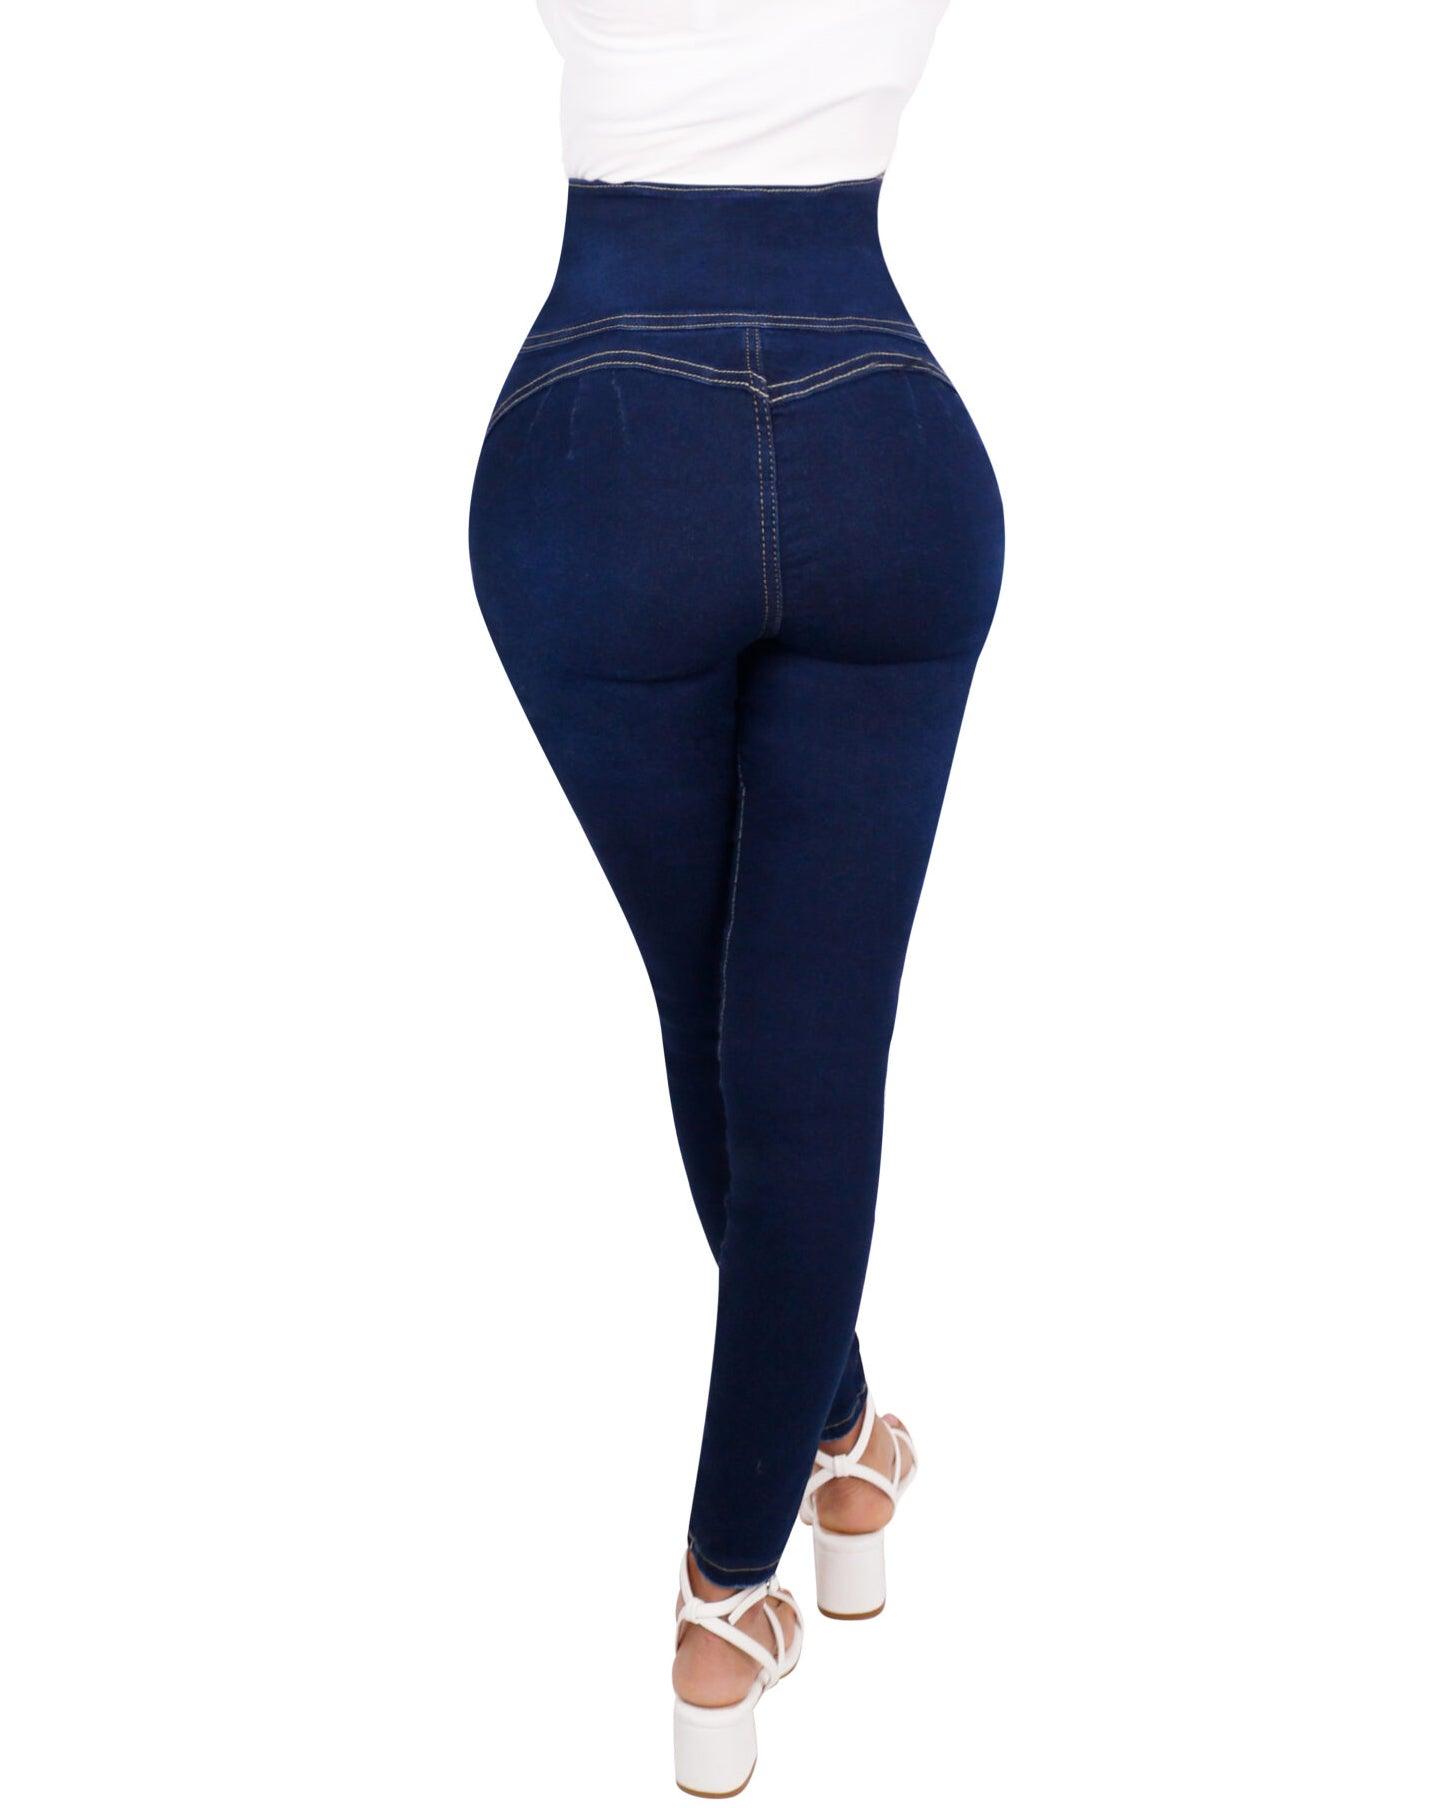 Wishe Butt Lifting Curvy Jeans Stretchy Jeans Waist High